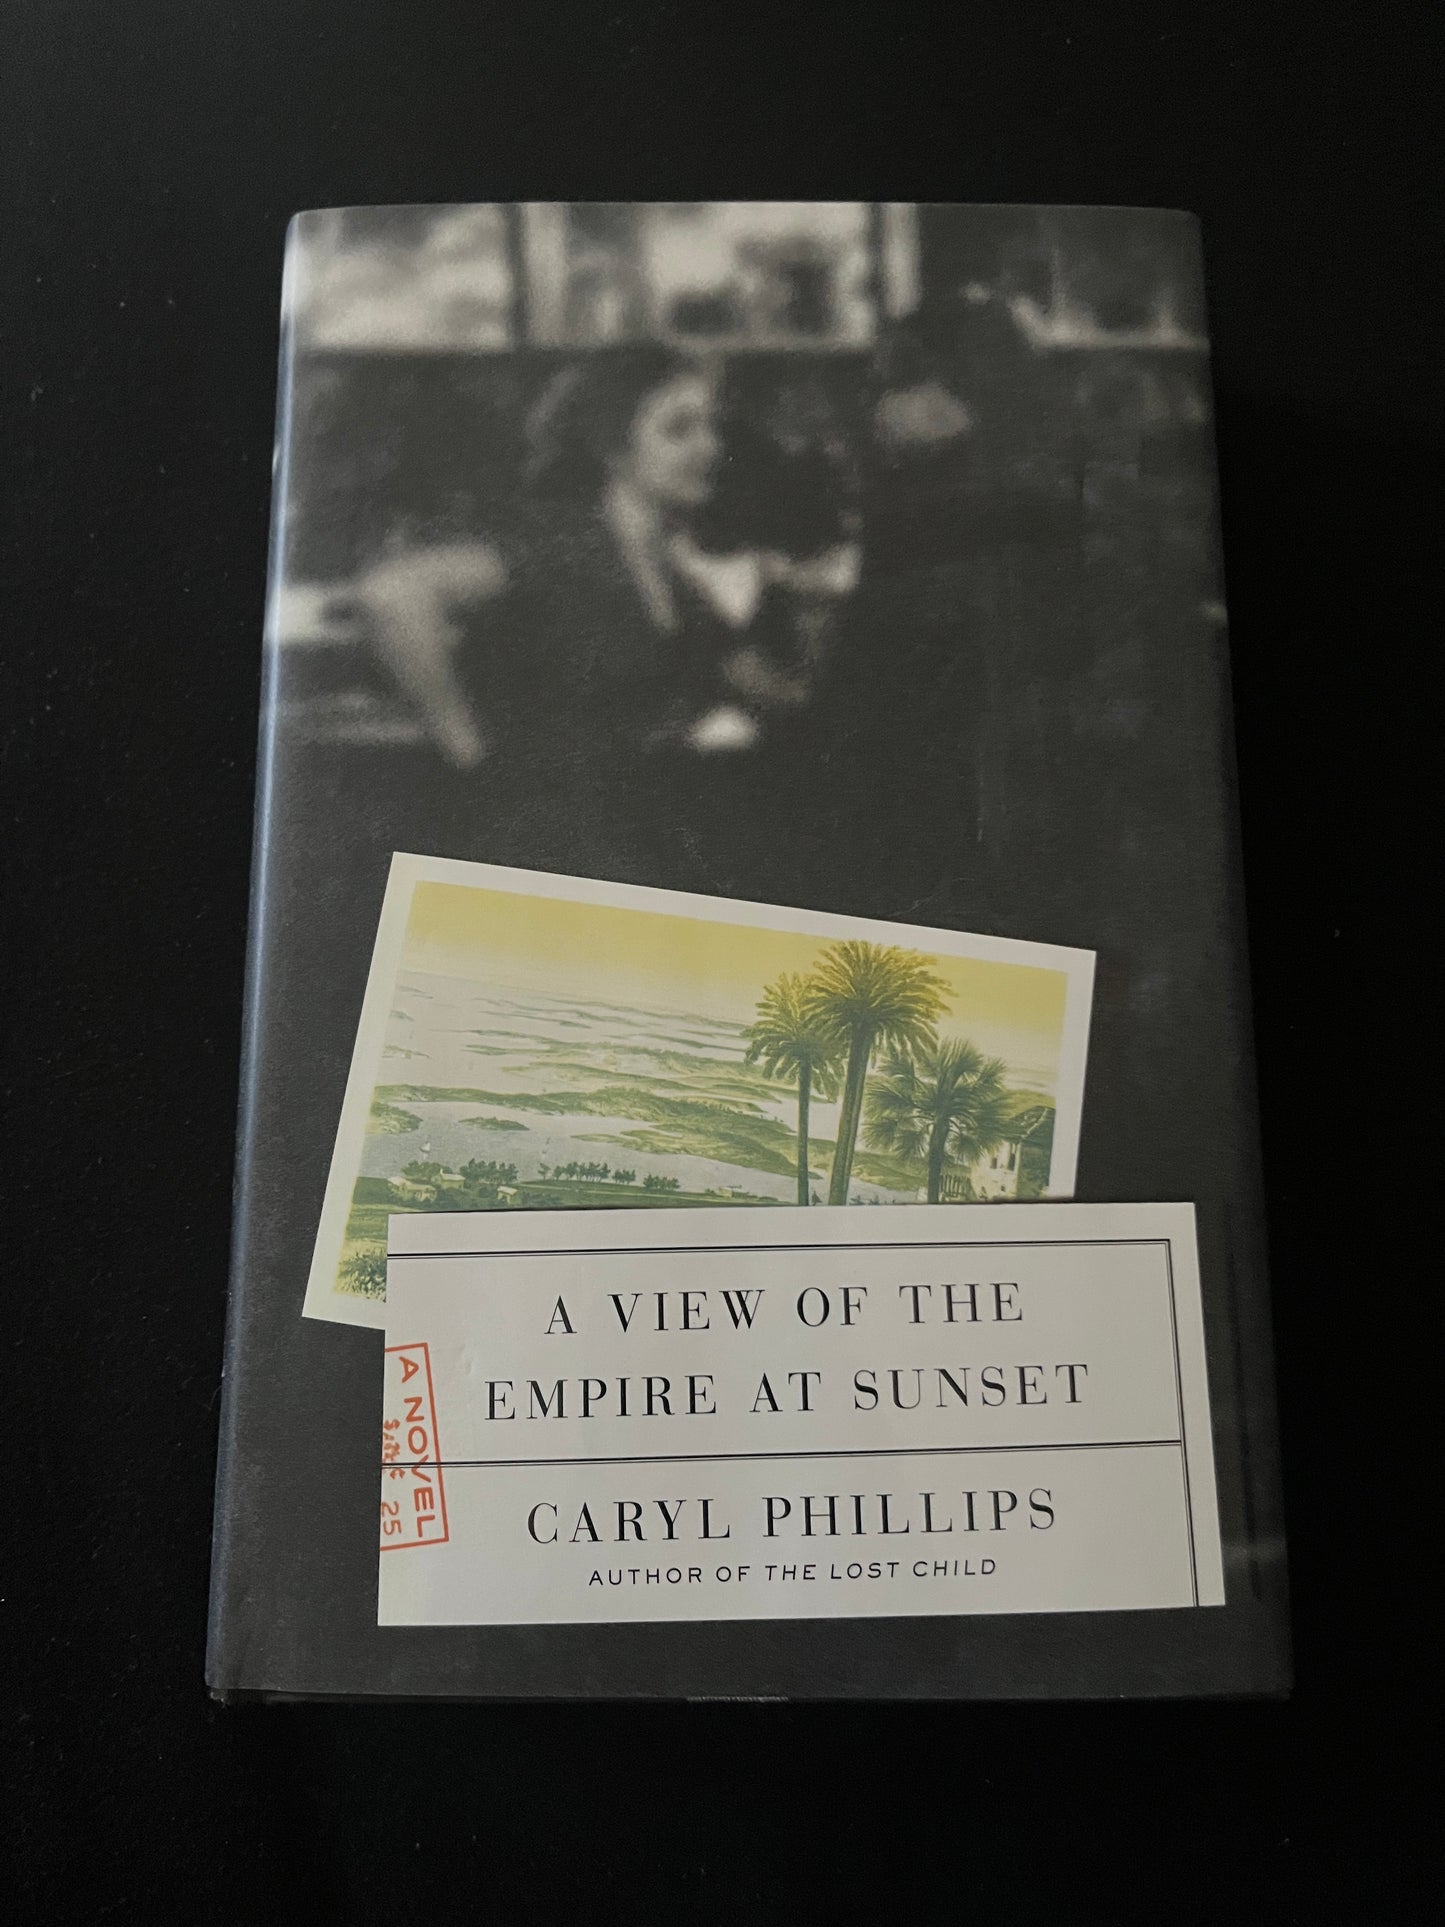 A VIEW OF THE EMPIRE AT SUNSET by Caryl Phillips